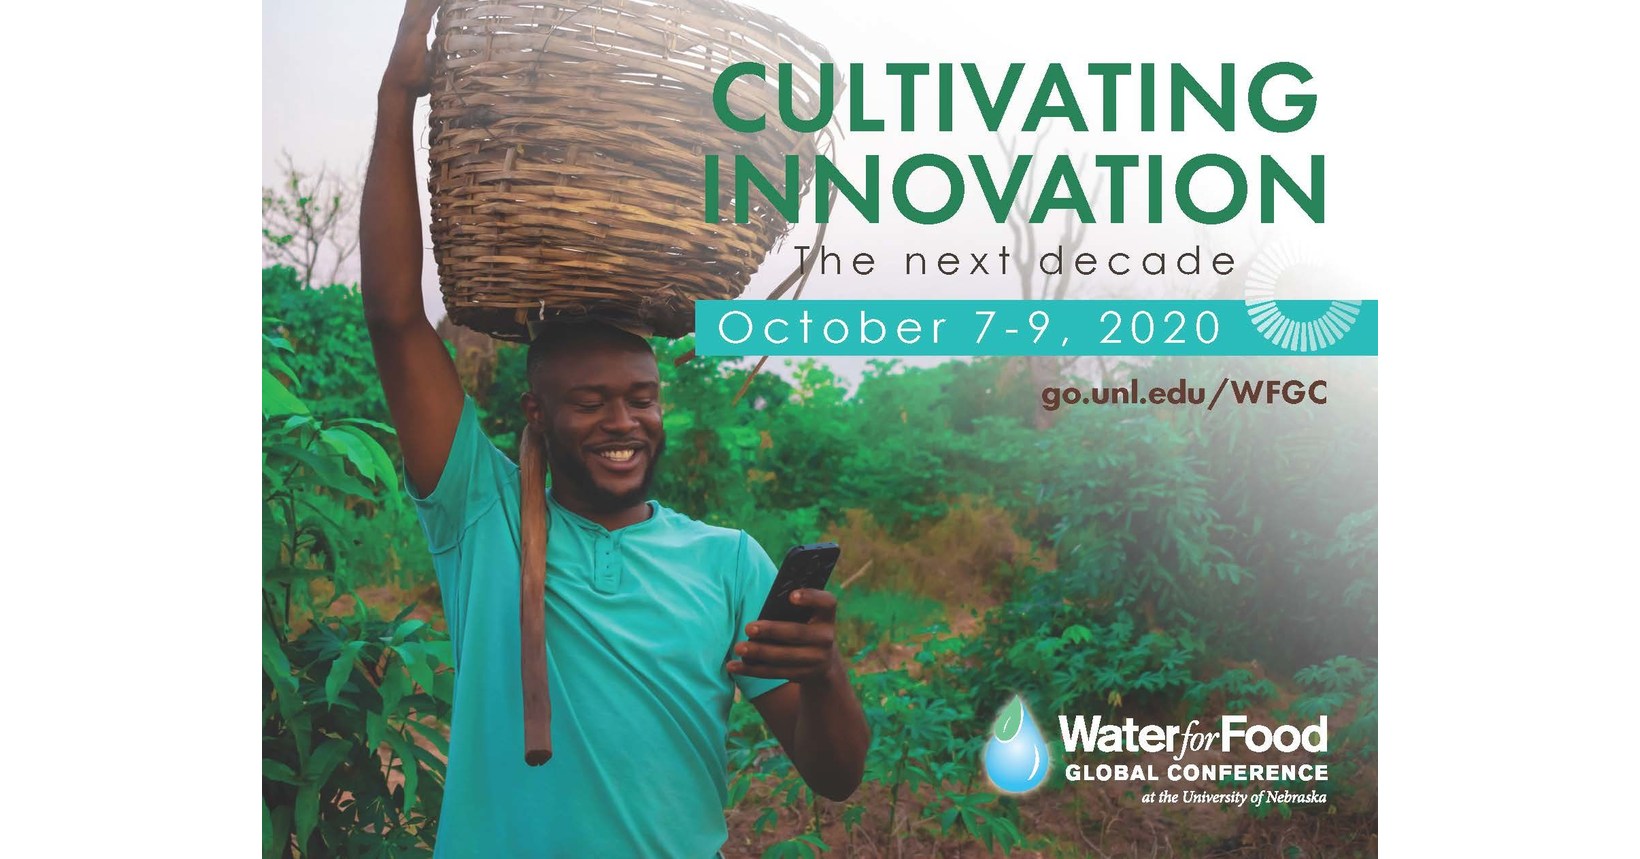 2020 Water for Food Global Conference: Call for Session Proposals